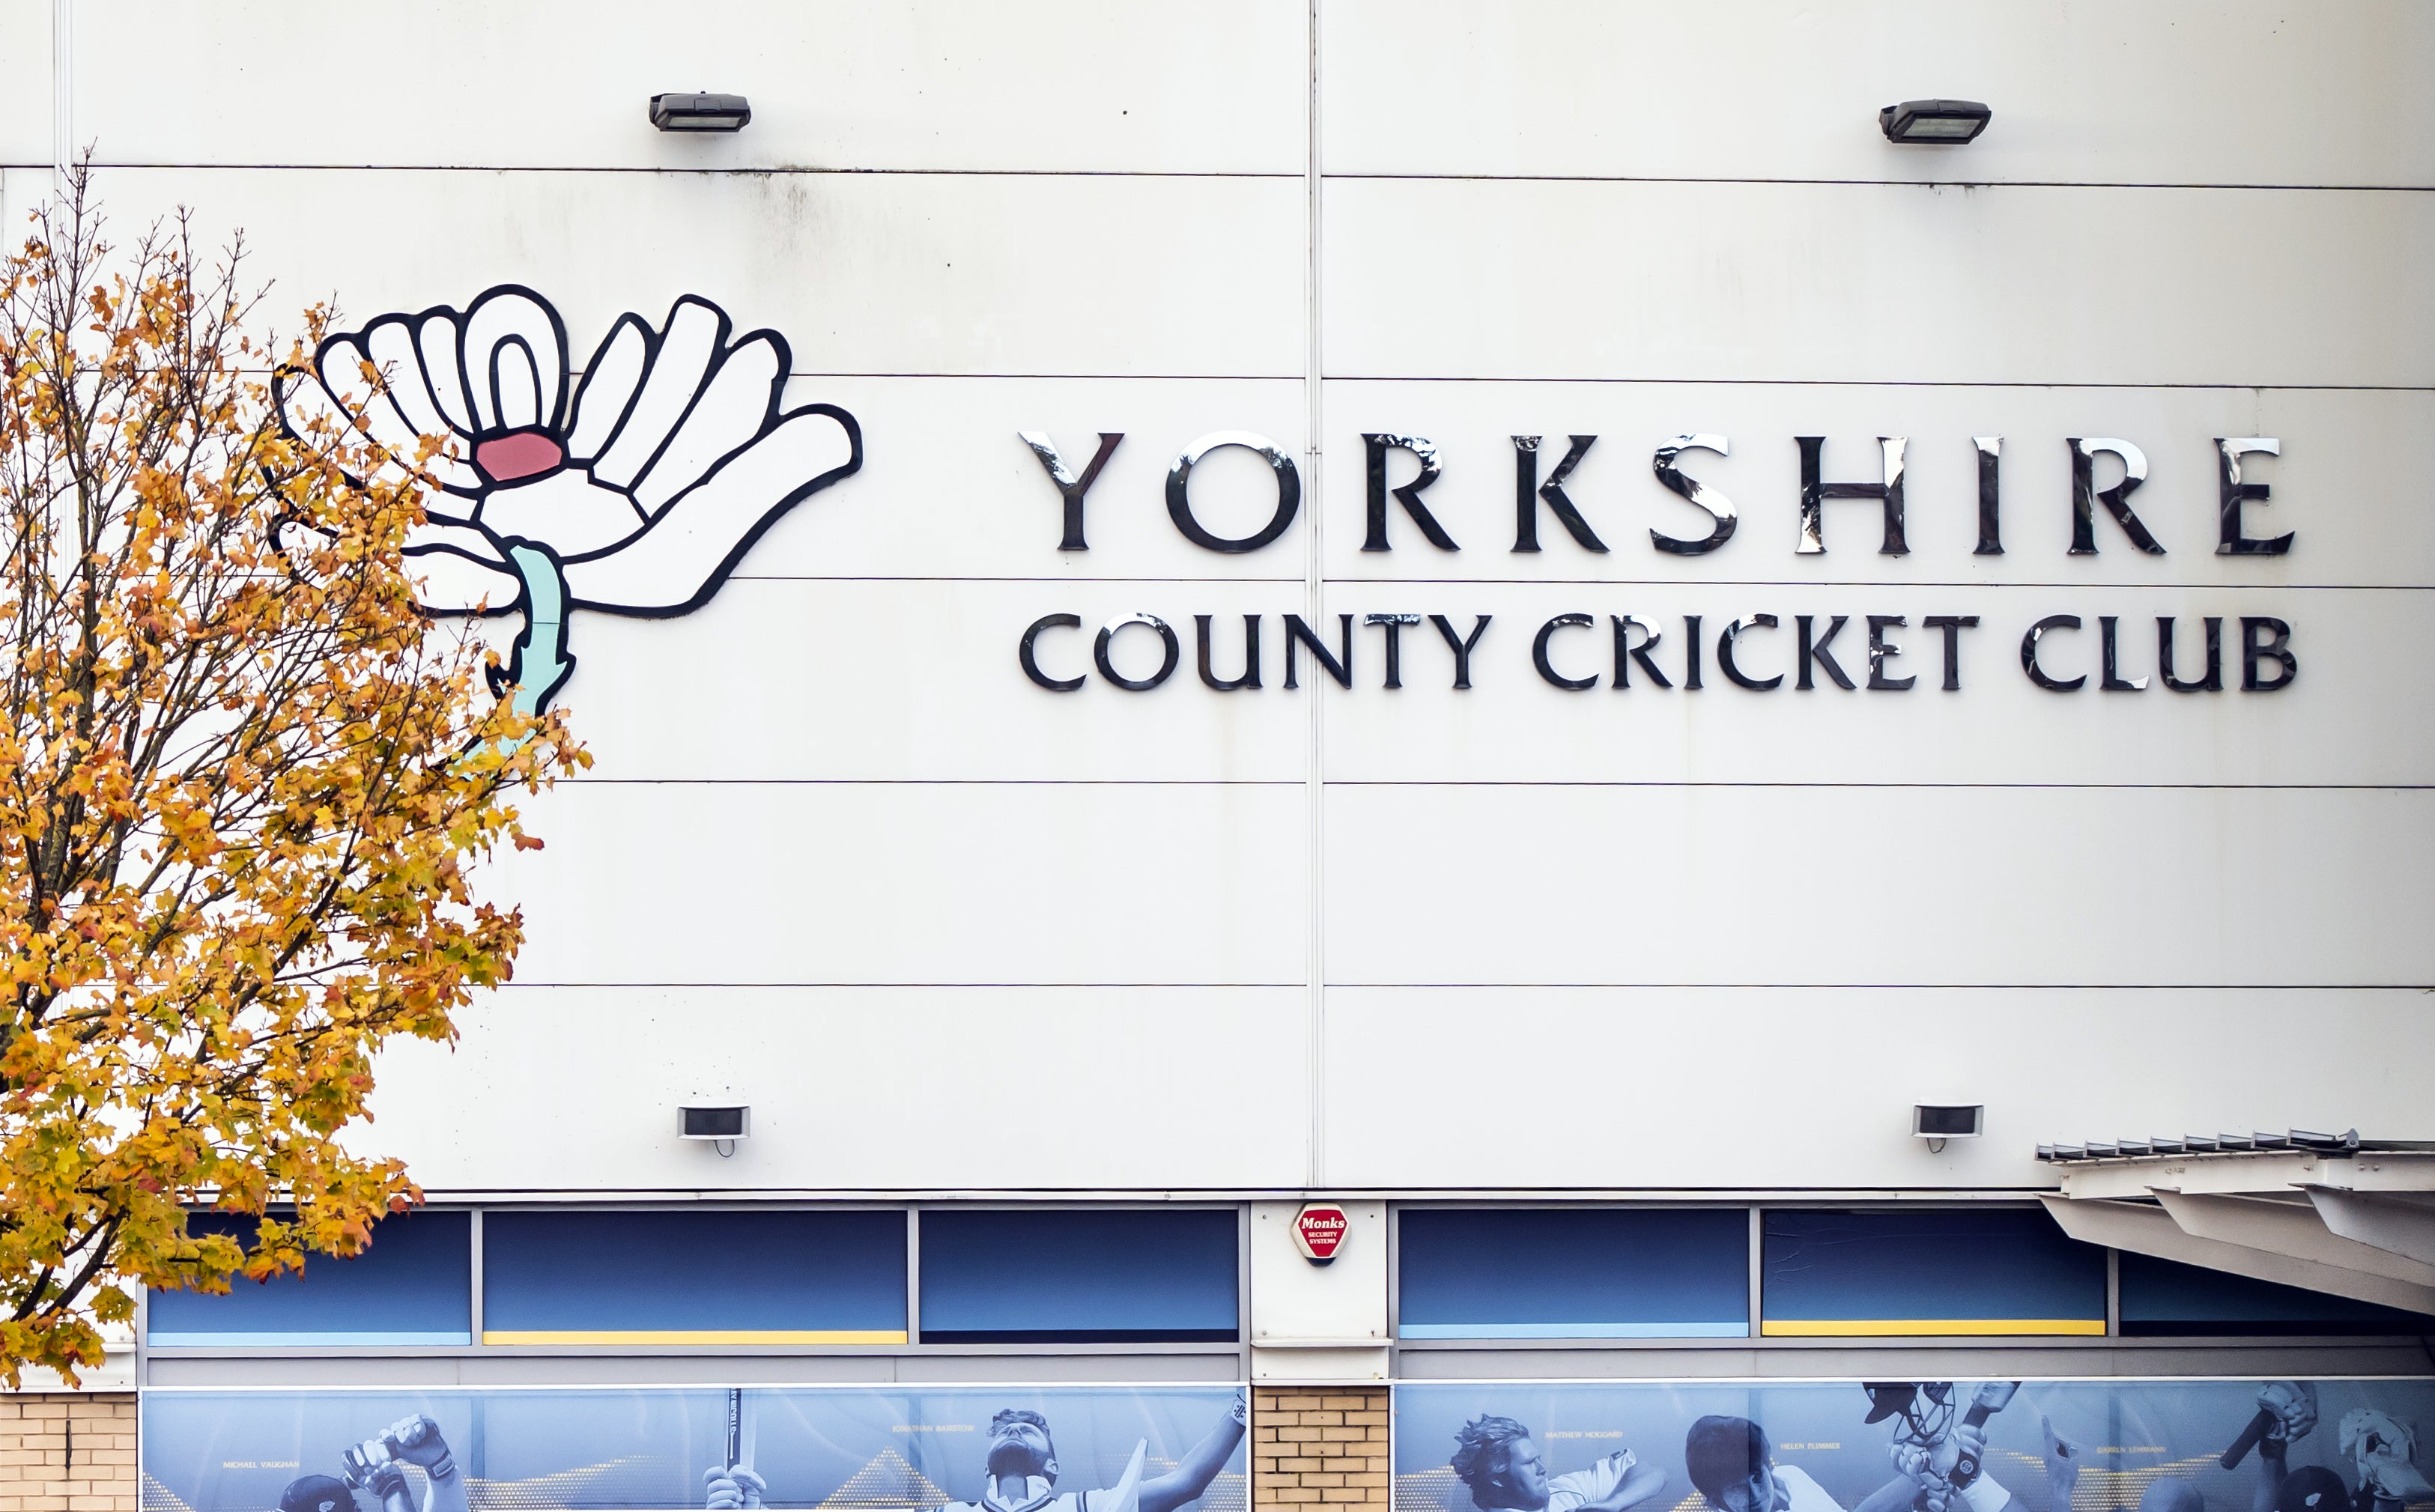 A sign outside Yorkshire County Cricket Club (Danny Lawson/PA)